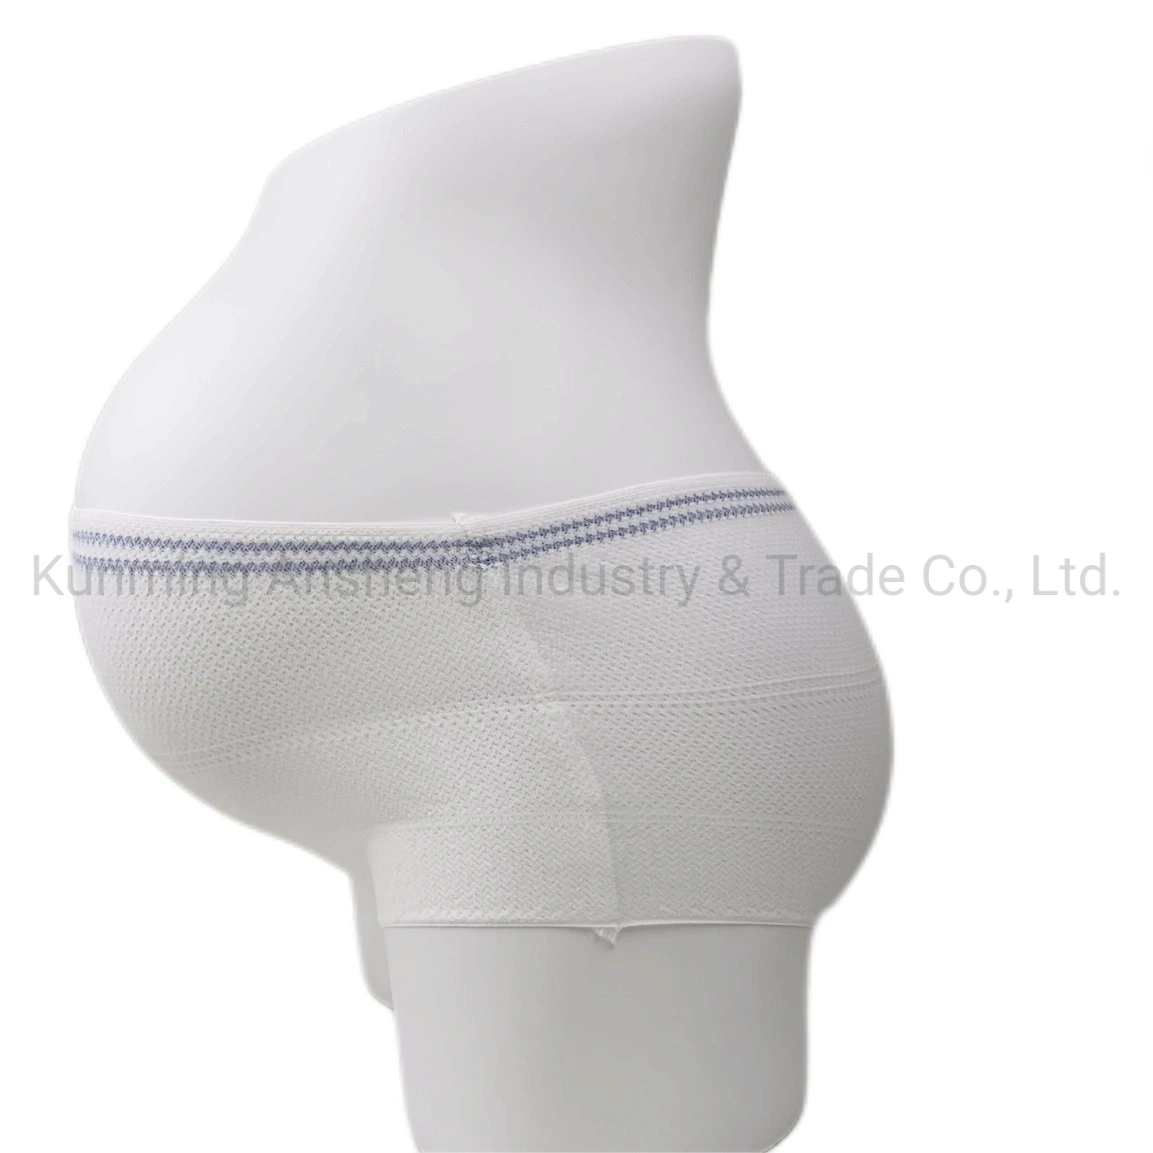 Disposable Mesh Panty One Use Soft Cotton Pregnancy Underpants